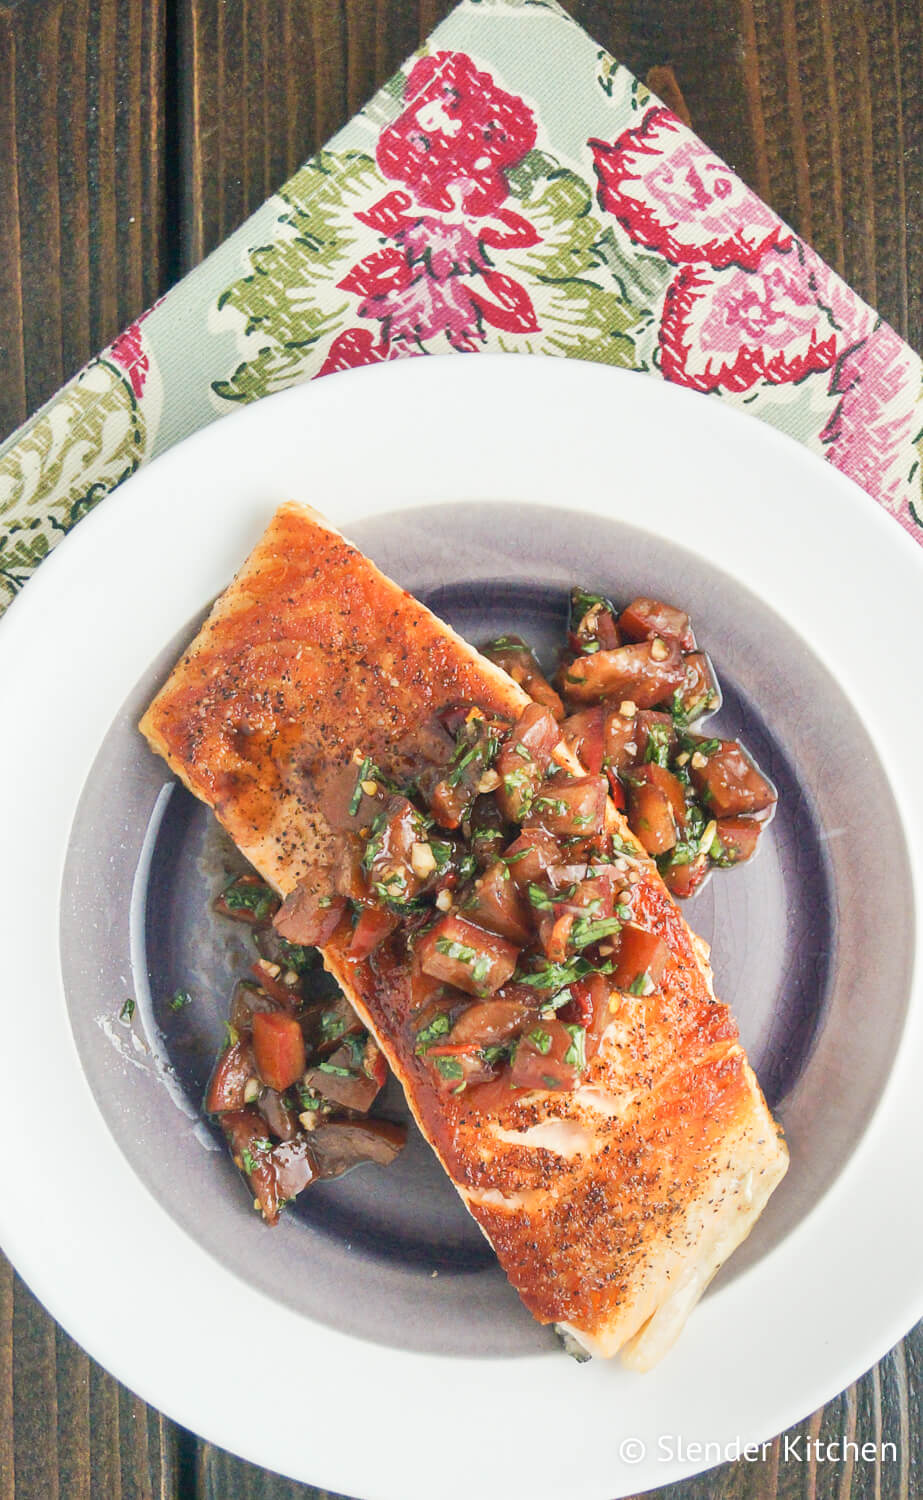 Italian salmon with tomato basil salsa on a white plate with a flowered napkin.